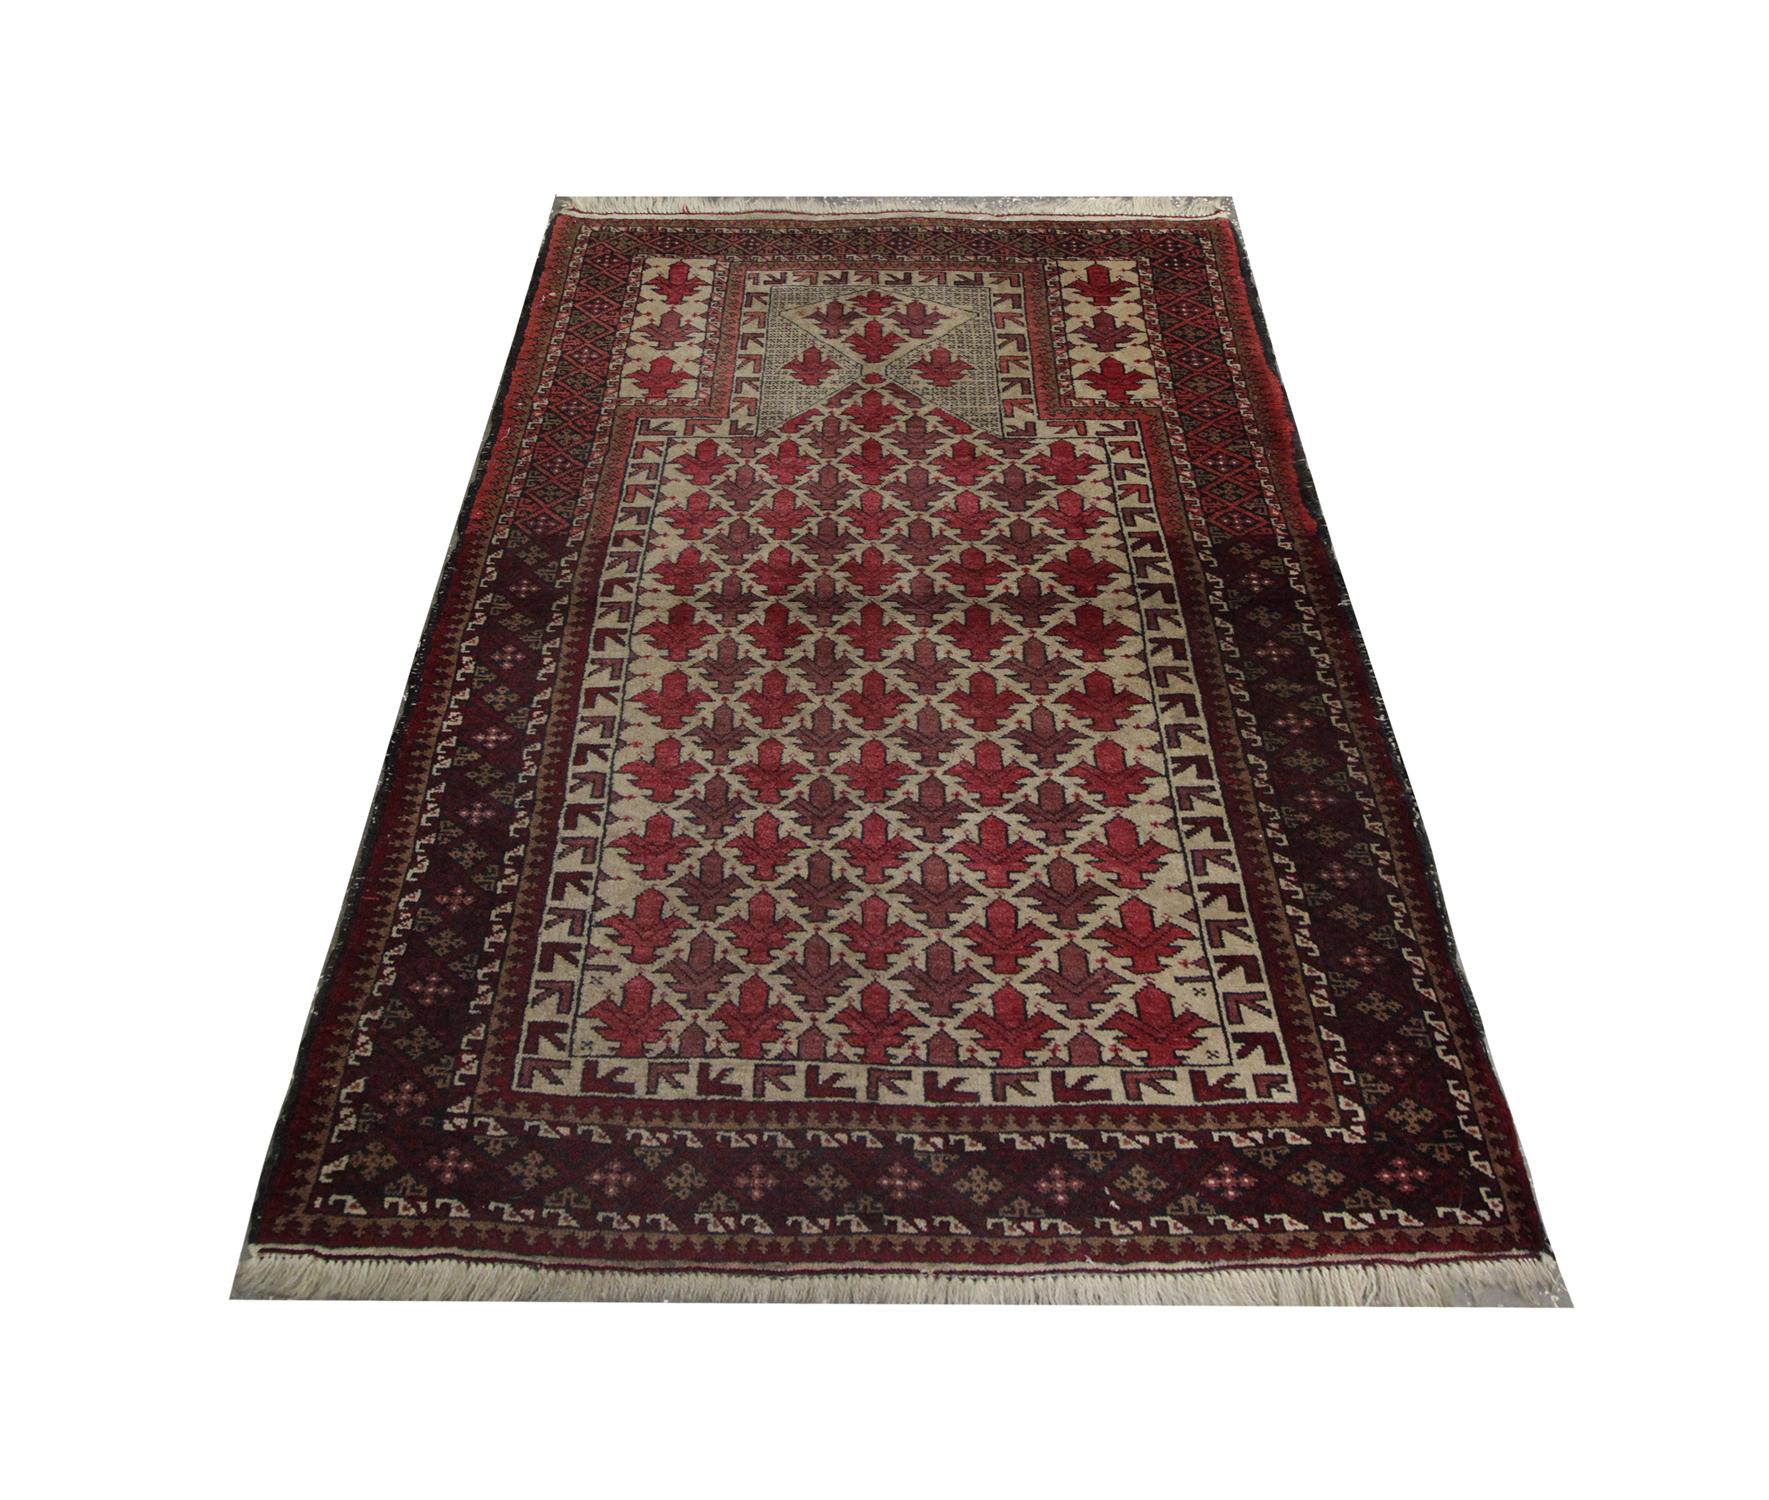 Deep reds have been used as the primary colours into this high-quality handmade carpet Antique Afghan rug, with a highly detailed repeat pattern design that was hand-woven in 1940 with hand-spun, vegetable-dyed wool, and cotton, by some of the